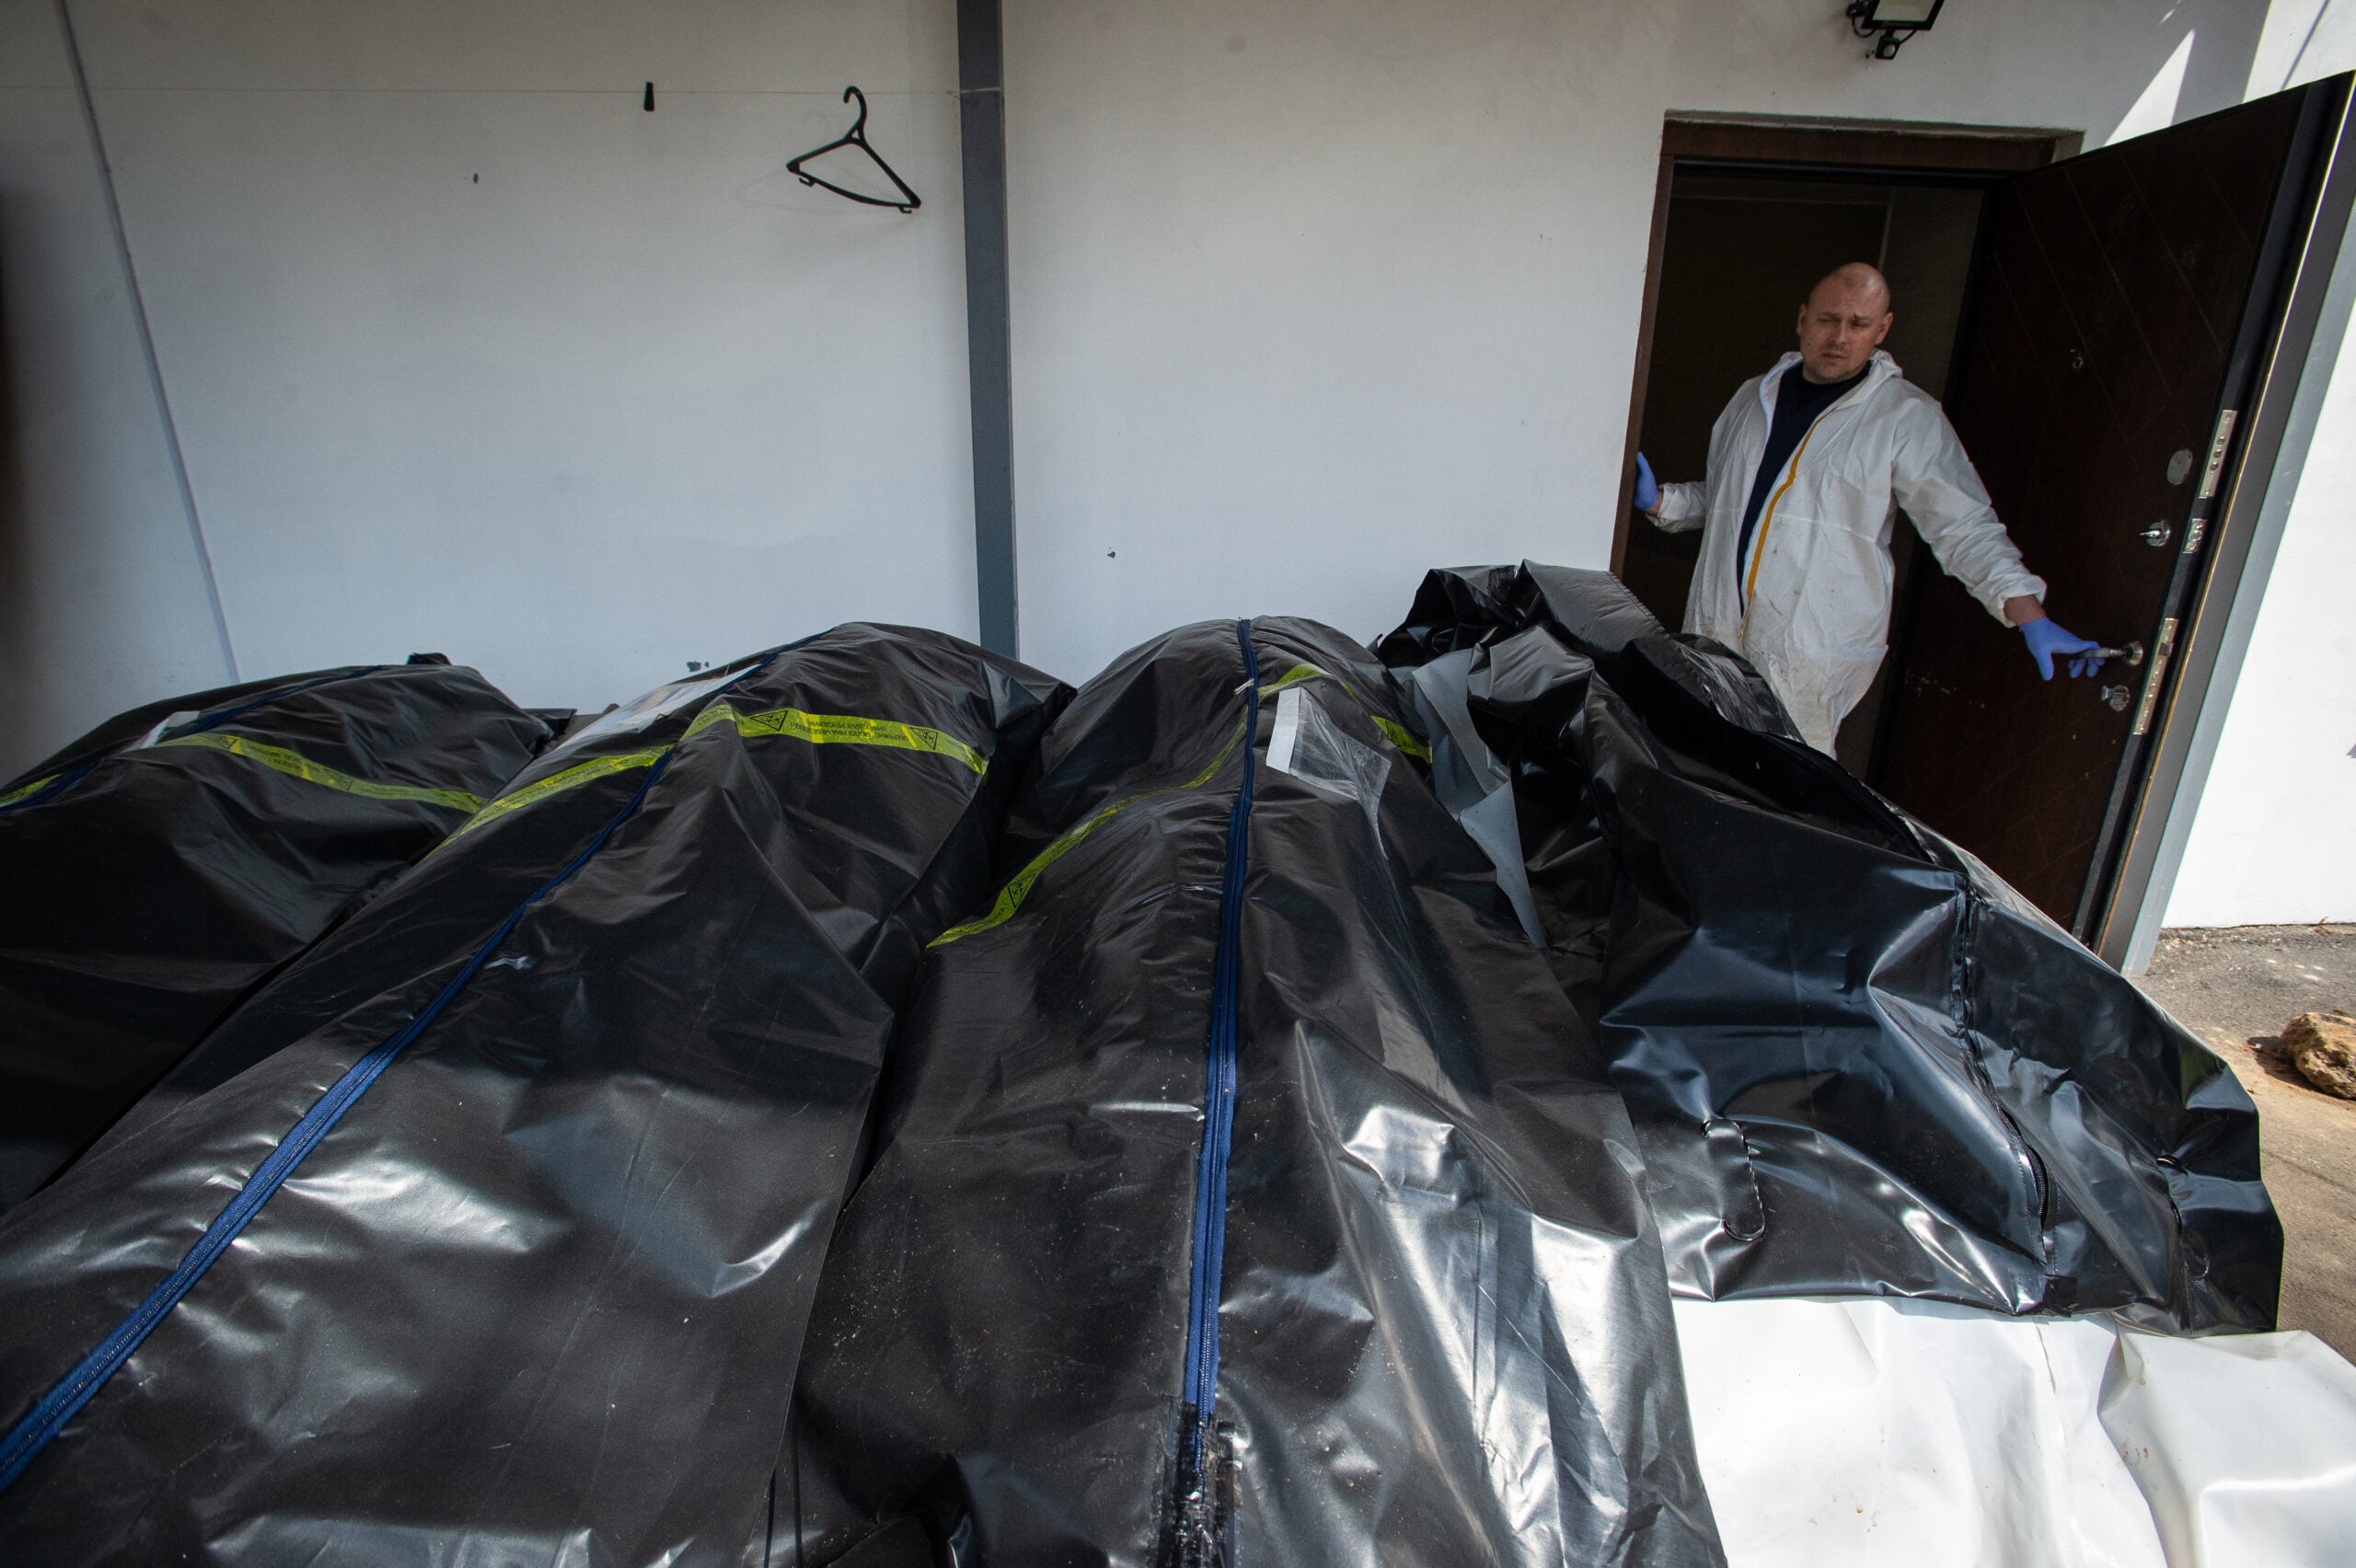 BUCHA, UKRAINE - APRIL 23: (EDITORS NOTE: Image contains graphic content) Ukrainian morticians look at body bags full of corpses, as a morgue overflows with victims who died during the Russian military presence in the Kyiv suburb of Bucha, Ukraine, on April 23, 2022. Ukrainian officials and volunteers are beginning the work of identifying the dead and gathering evidence for war crimes accusations, and say that more than 1,000 civilians lost their lives when Russian troops occupied districts northwest of the capital for weeks after a February 24 invasion. (Photo by Scott Peterson/Getty Images)